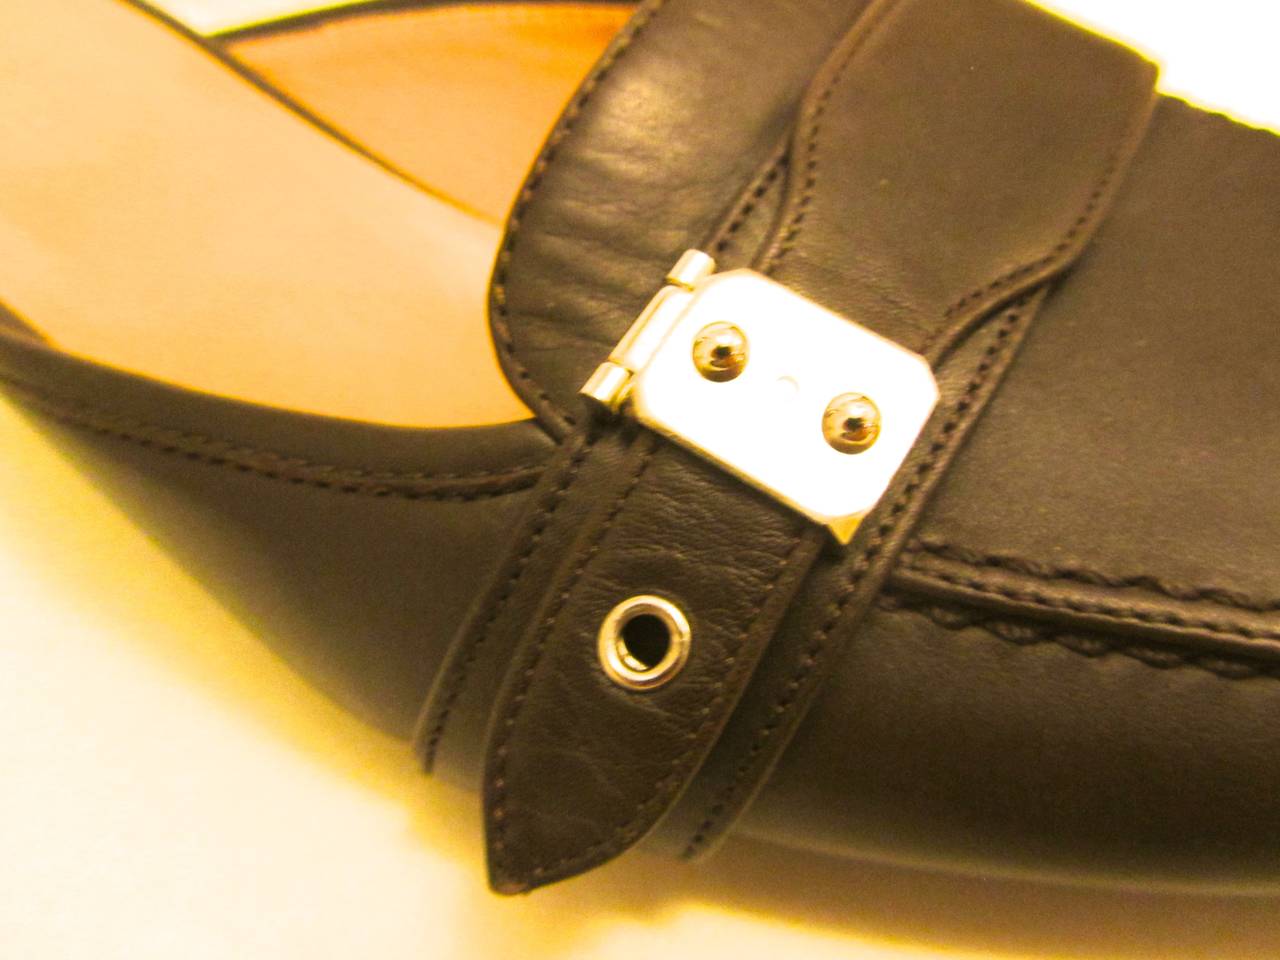 New Hermes mule shoes. Brown. Leather. Kitten heels. Palladium hardware with a keyhole and the Hermes name inscribed upon the metal. 

Beautiful for any occasion. More photos available upon request.

Inside of toe to heel - 9.5 inches
Heel - 2